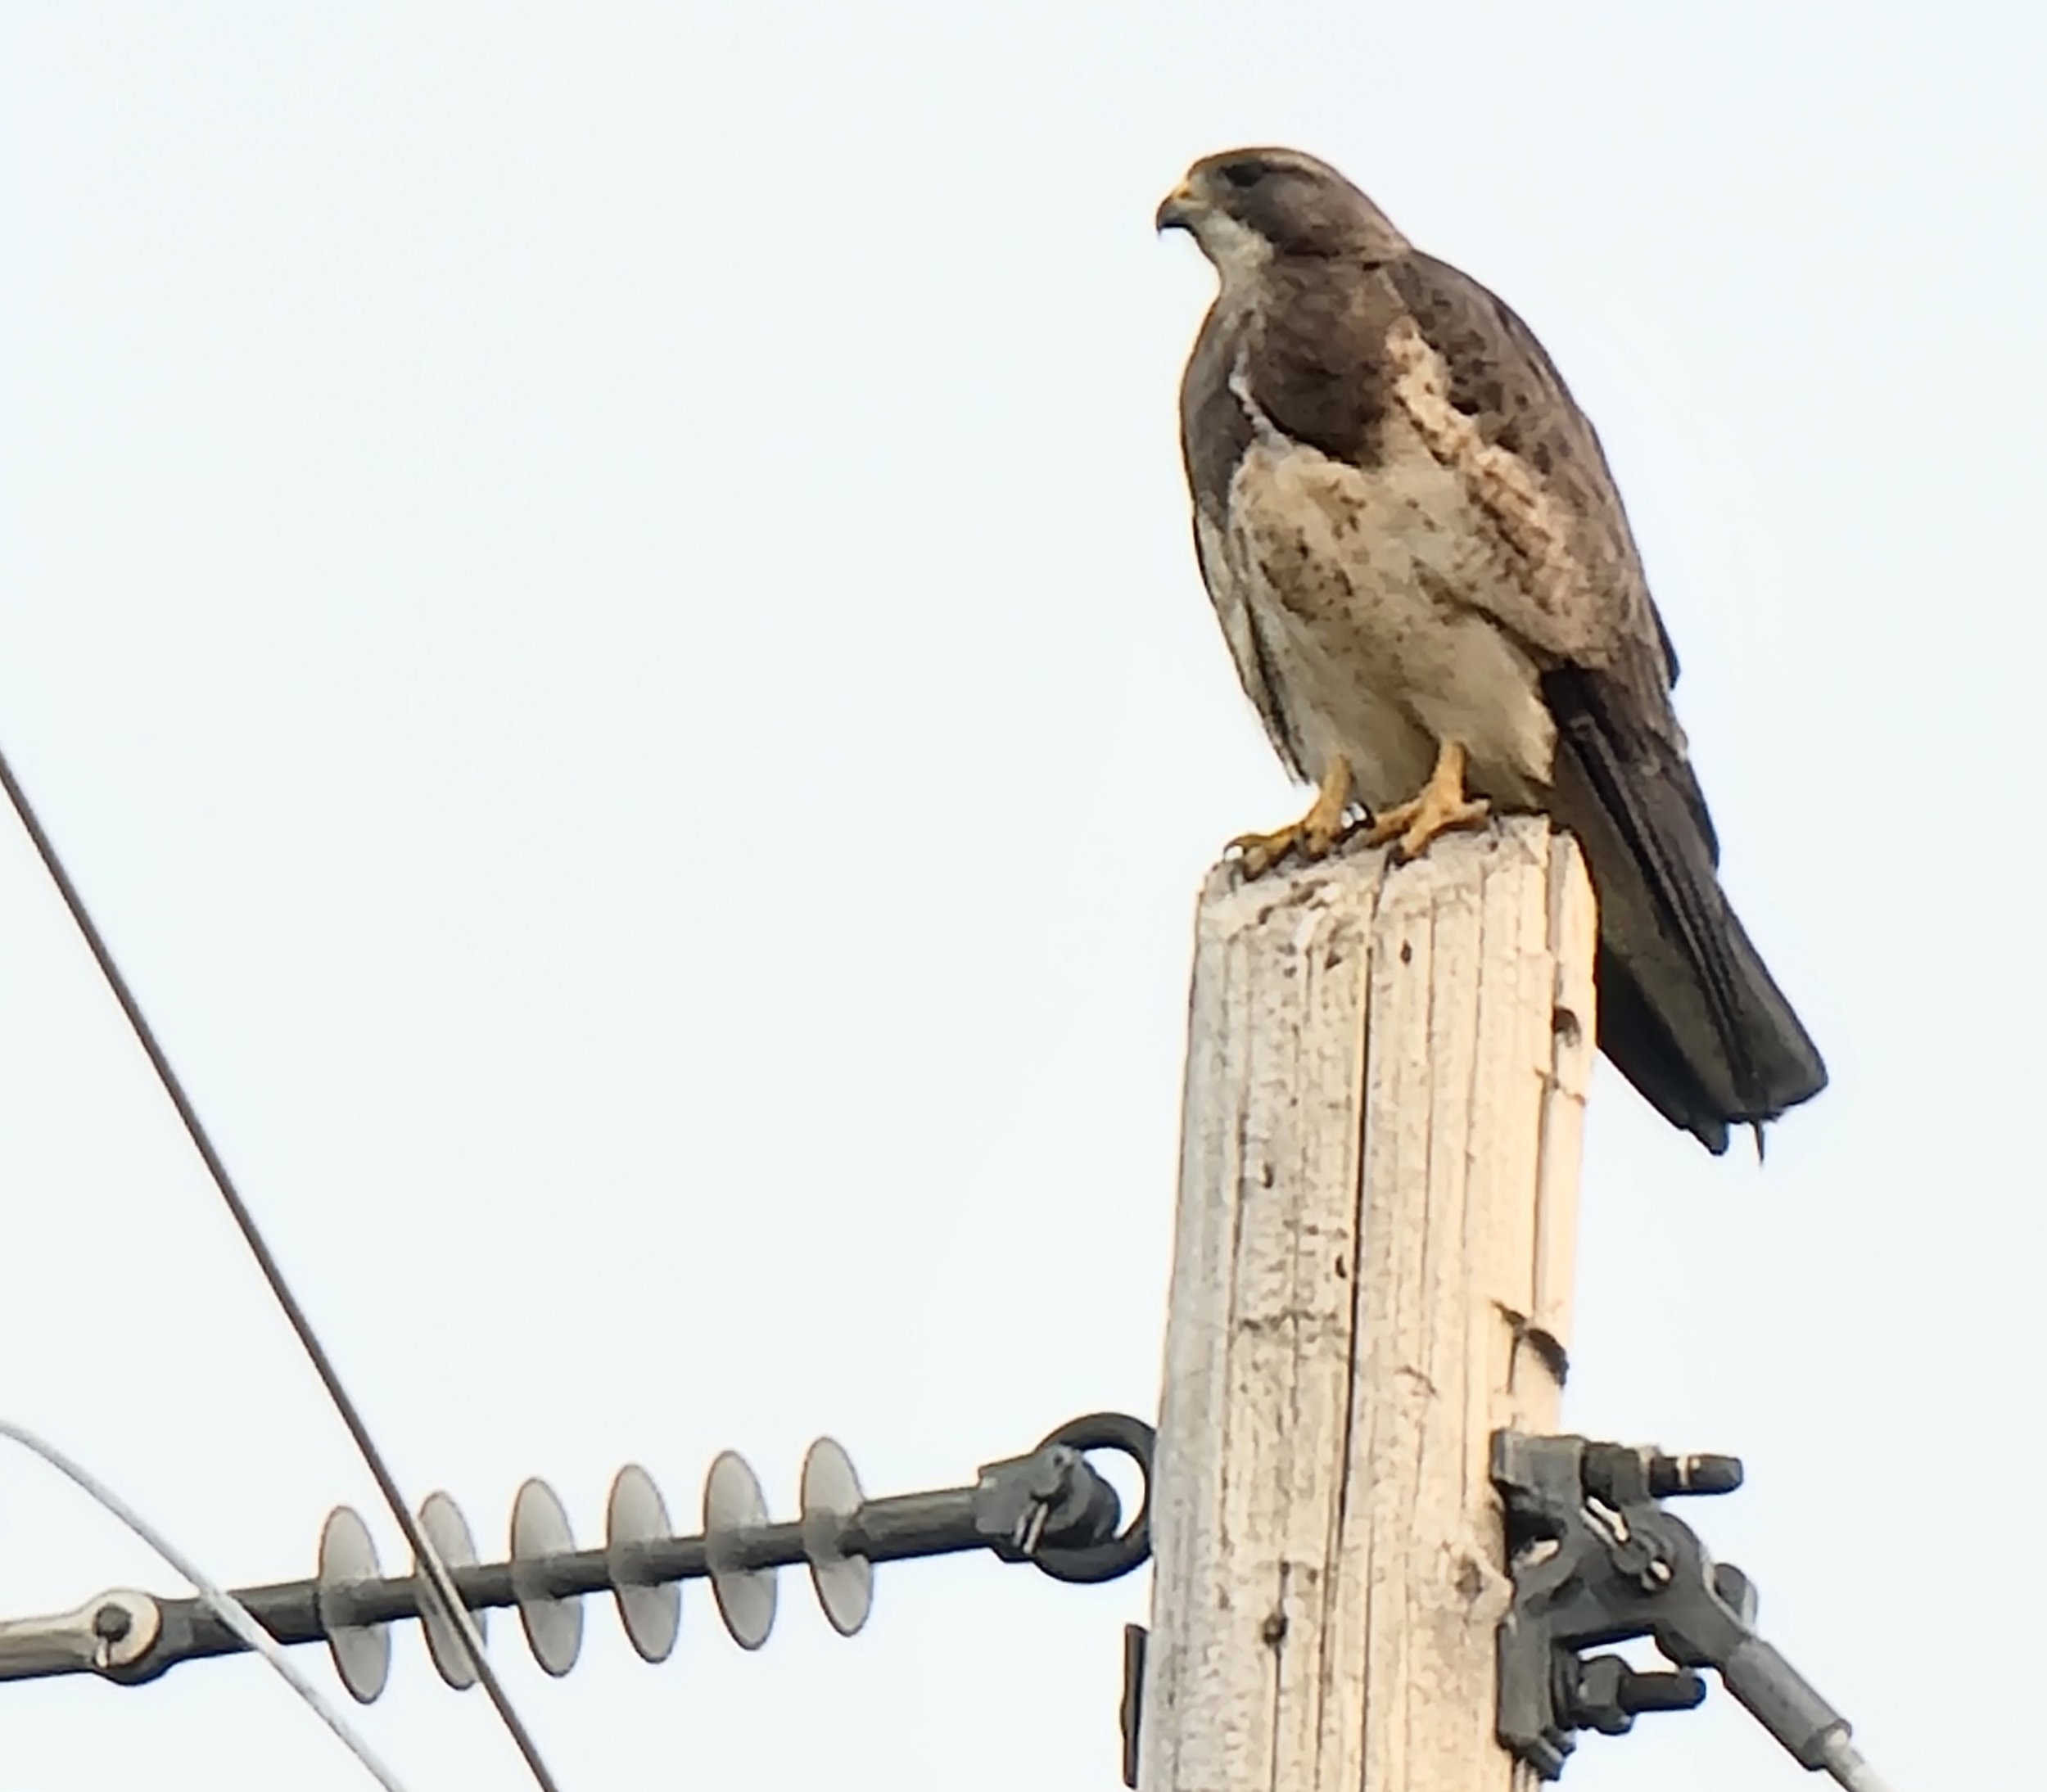 There's a Red Tail Hawk on every 5th telephone poll in the prairies, they're absolutely everywhere.